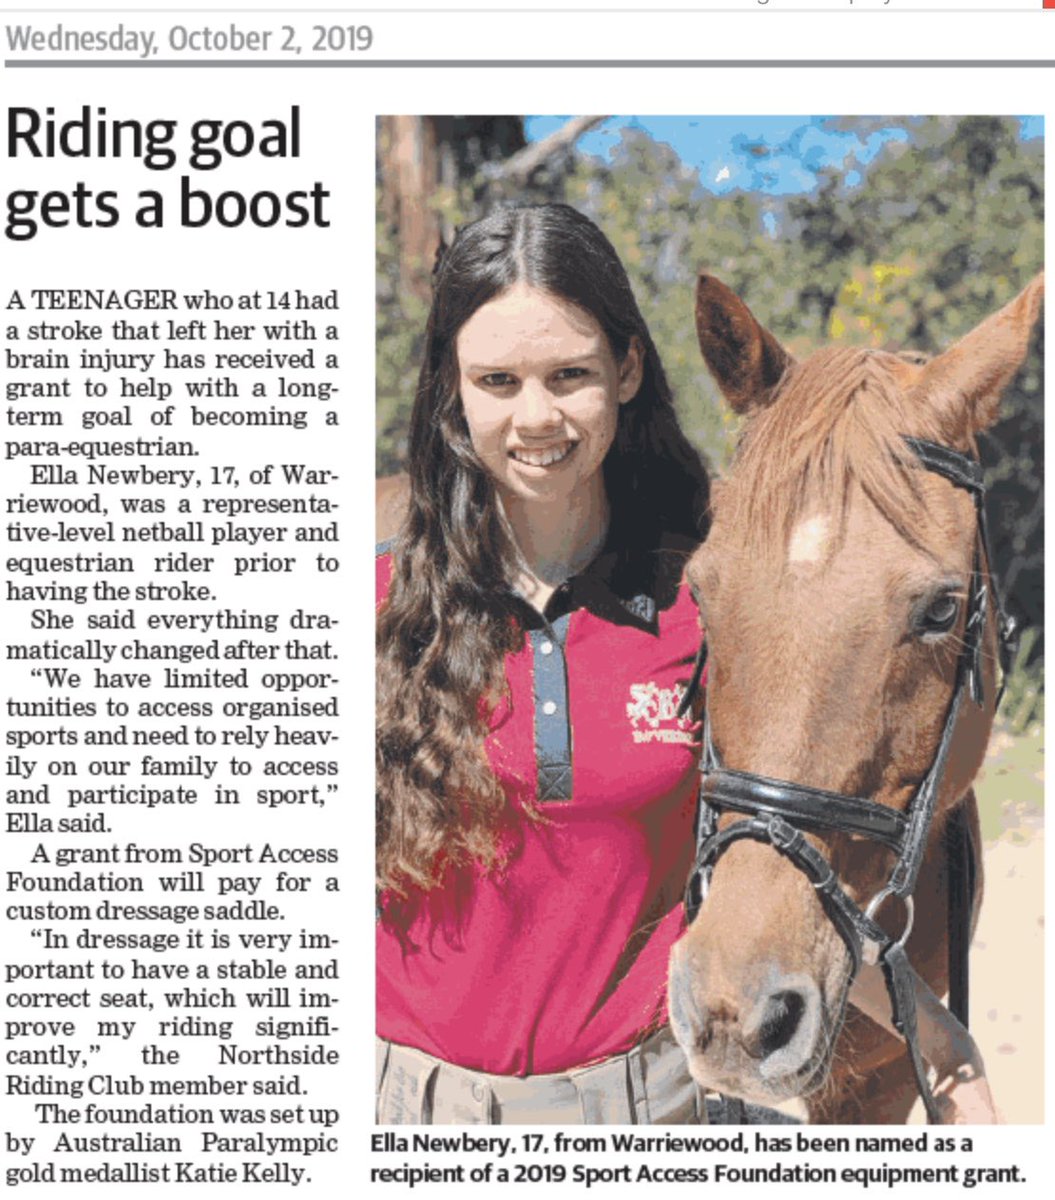 “We have limited opportunities to access organised sport and this (Sport Access Foundation $2,000) grant will go a long way helping me to do equestrian.' Ella Newbery, 17 years, Warriewood, NSW.

#parasport #paraequestrian #paralympics